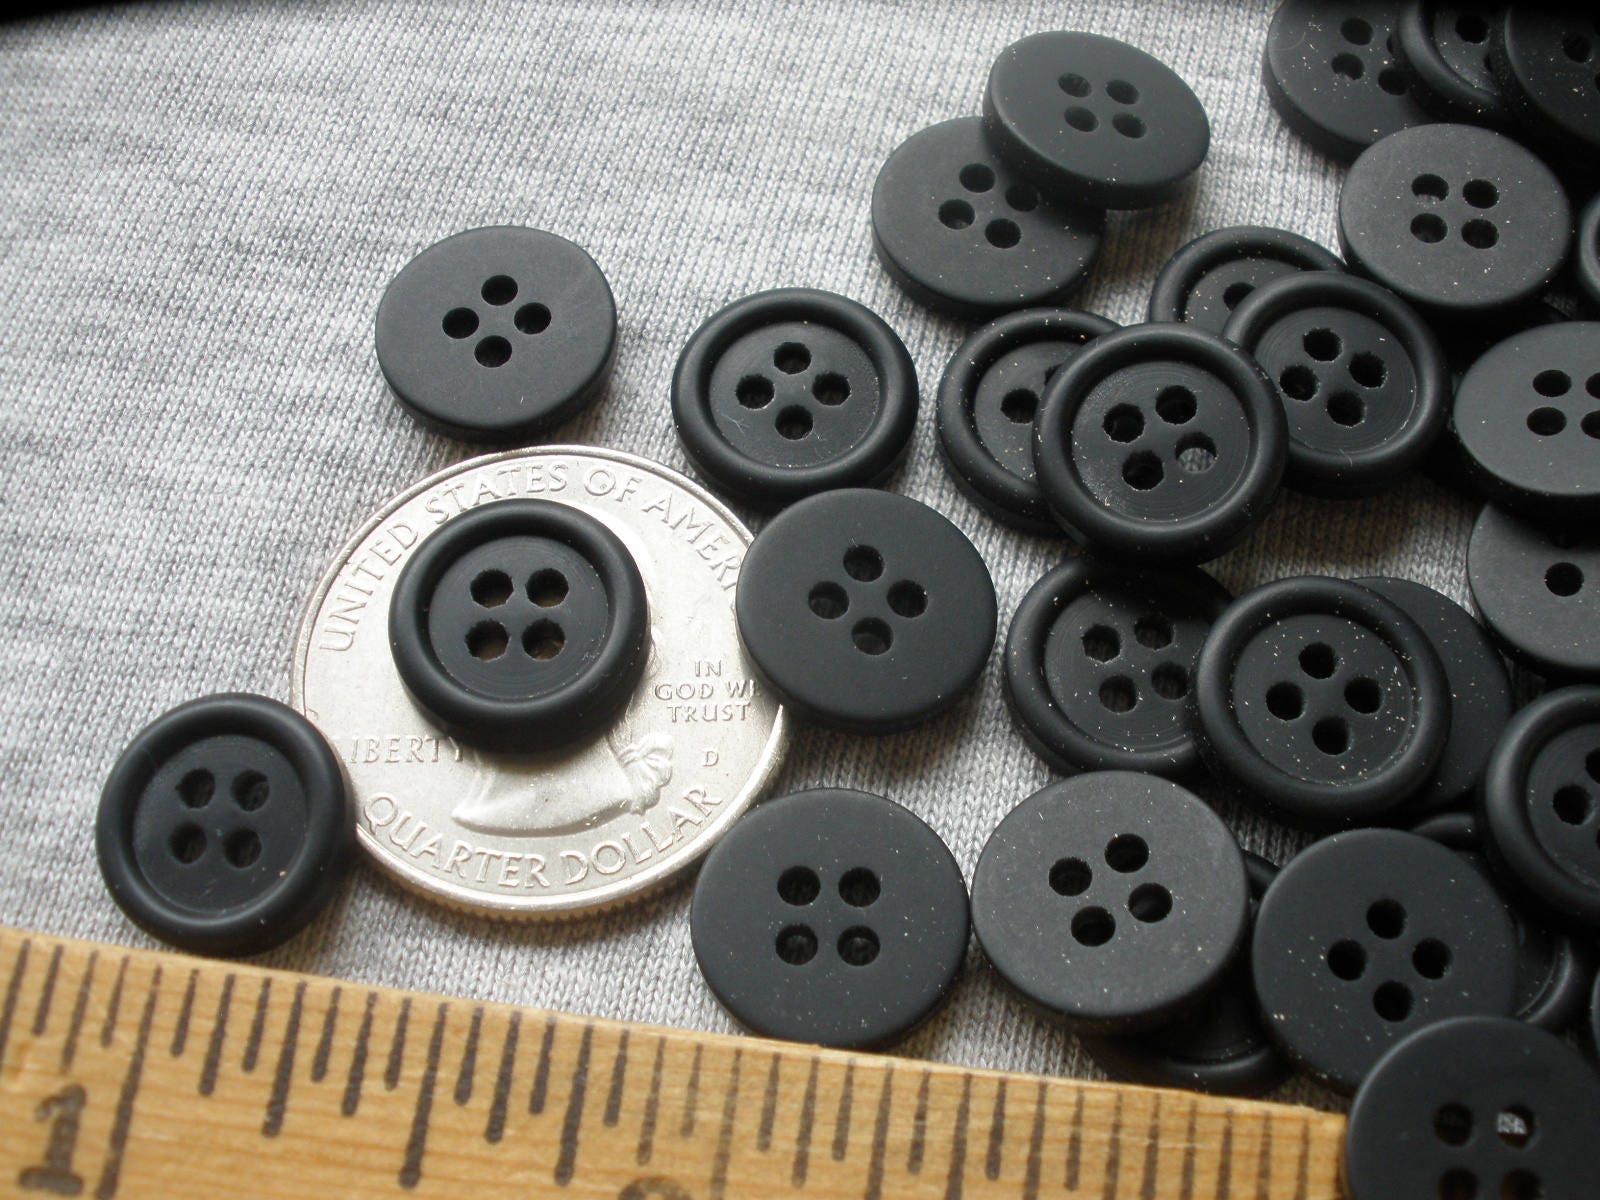 12 Pcs Black Buttons - 4 Hole 18L Buttons for Sewing Size 0,35” 0,4” 0,45” Round Buttons for Crafts & DIY – Plastic 9,10,11mm Buttons - Sewing